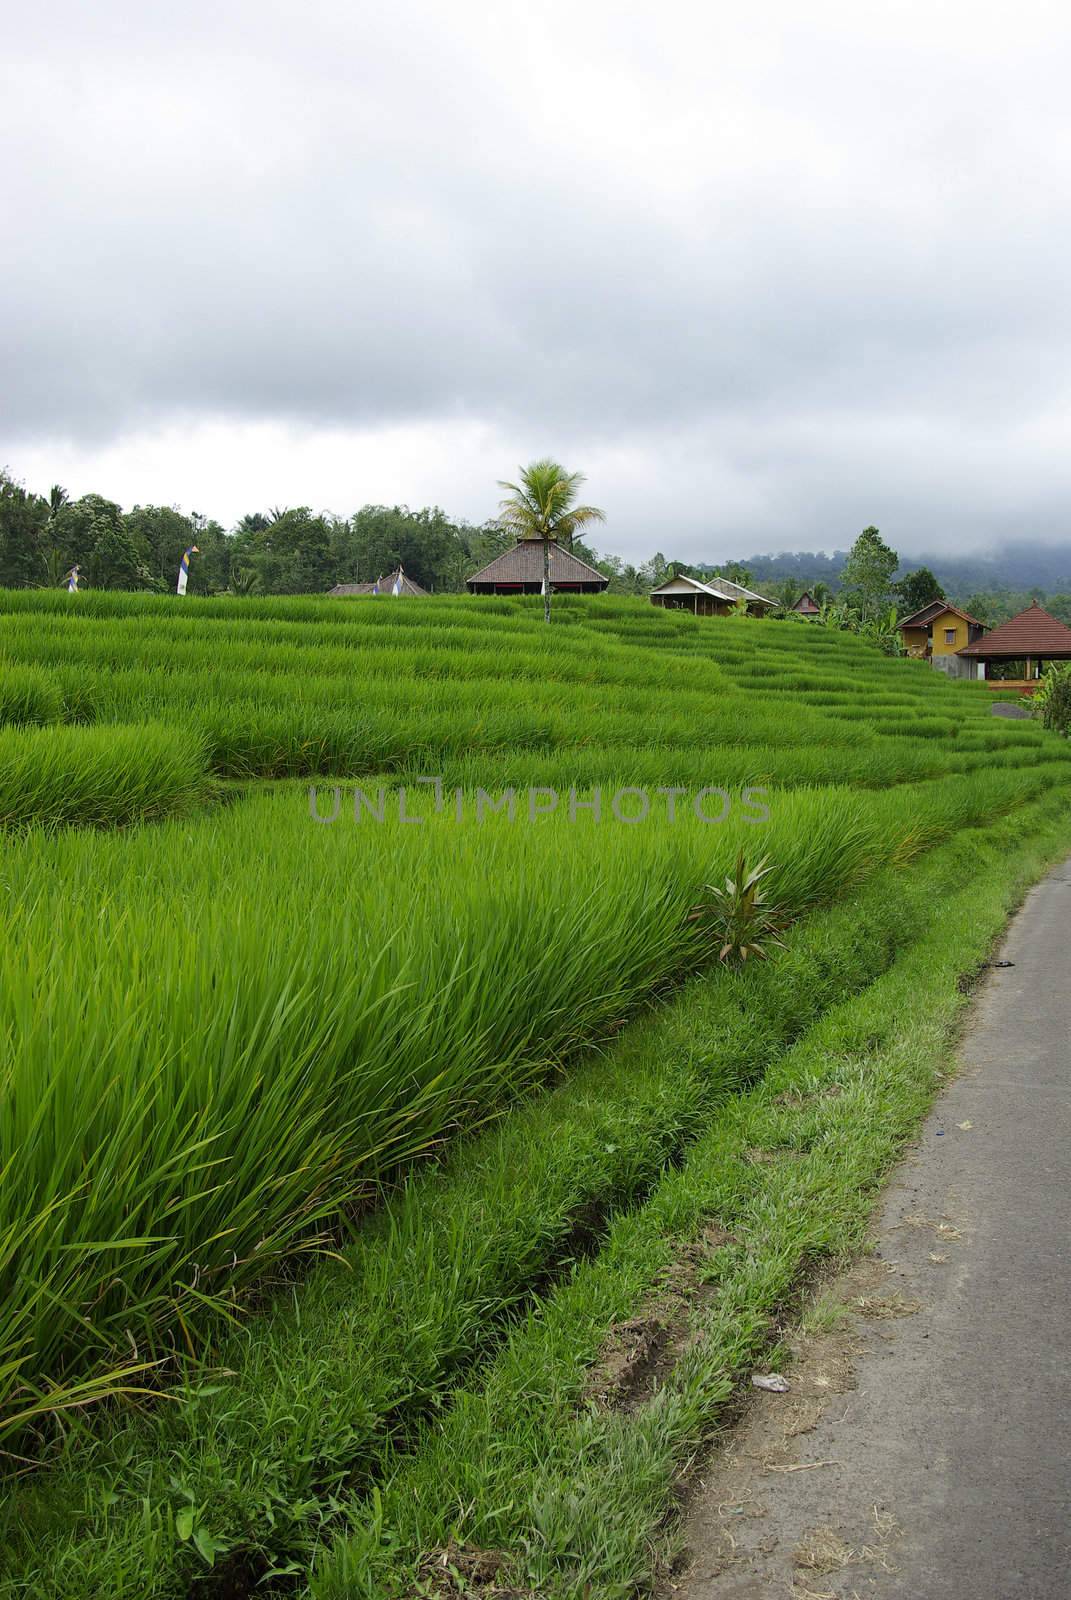 Ricefield and huts in Bali by shkyo30